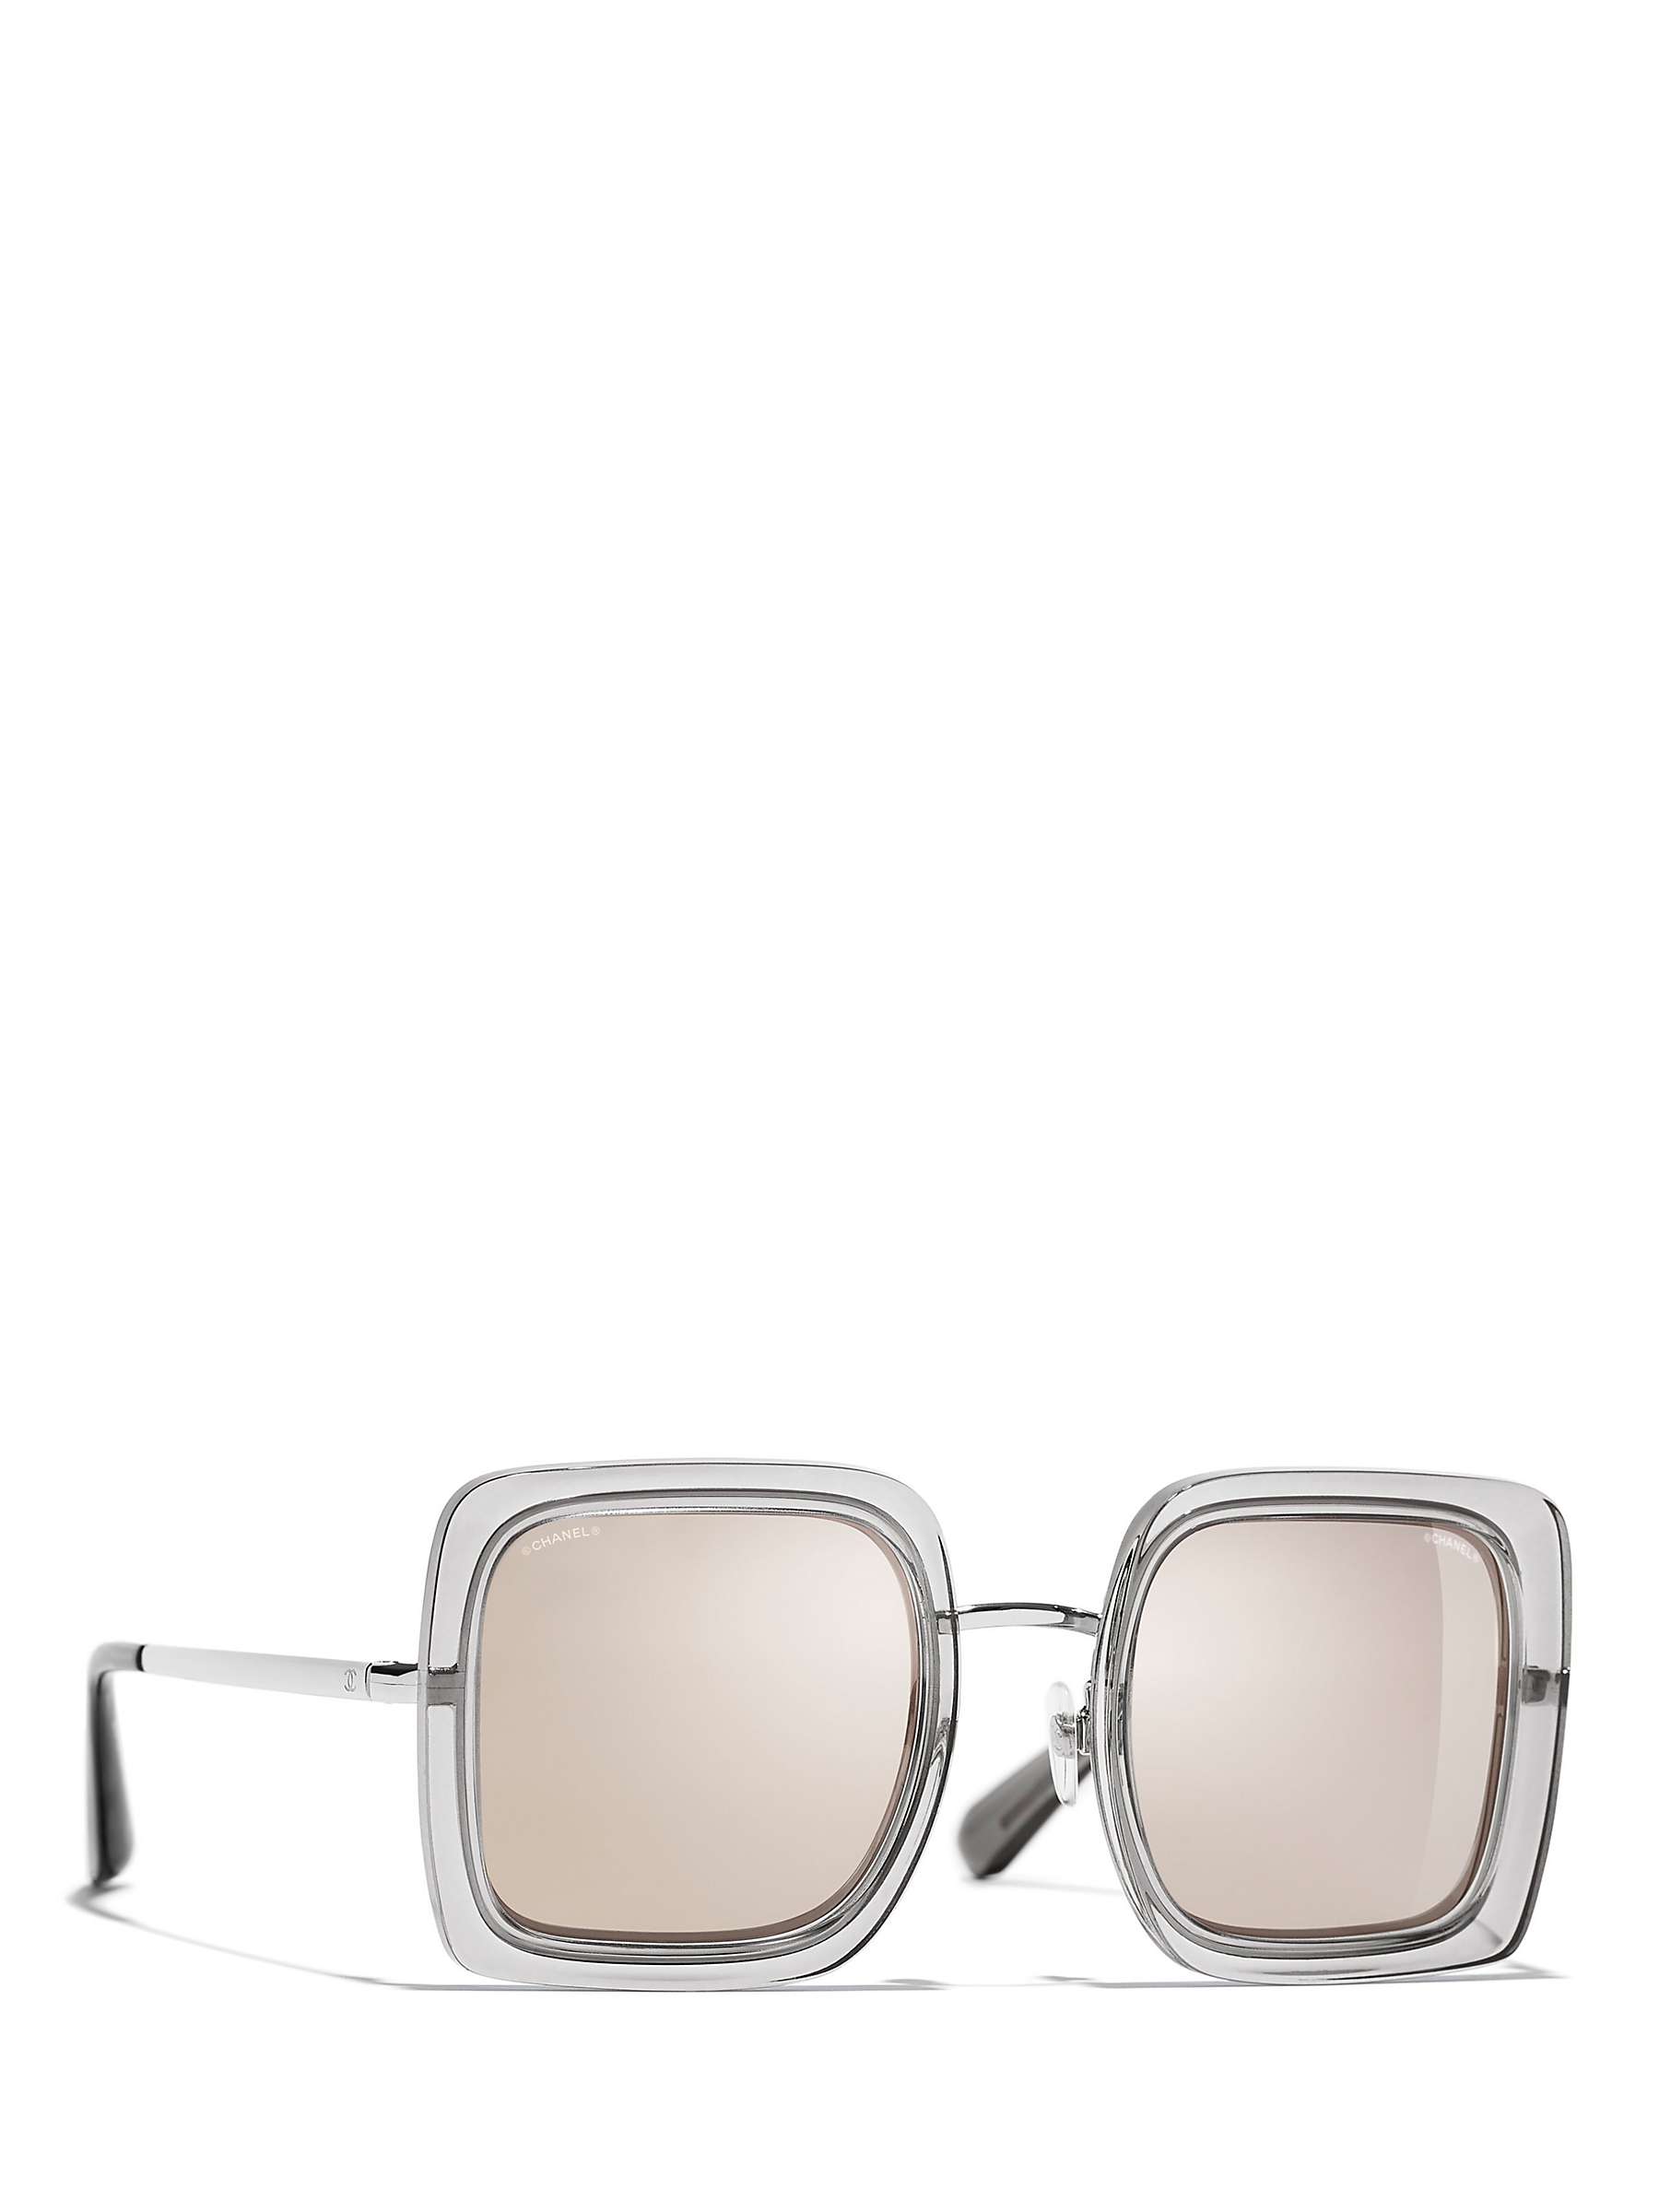 Buy CHANEL Square Sunglasses CH4240 Grey/Mirror Clear Online at johnlewis.com